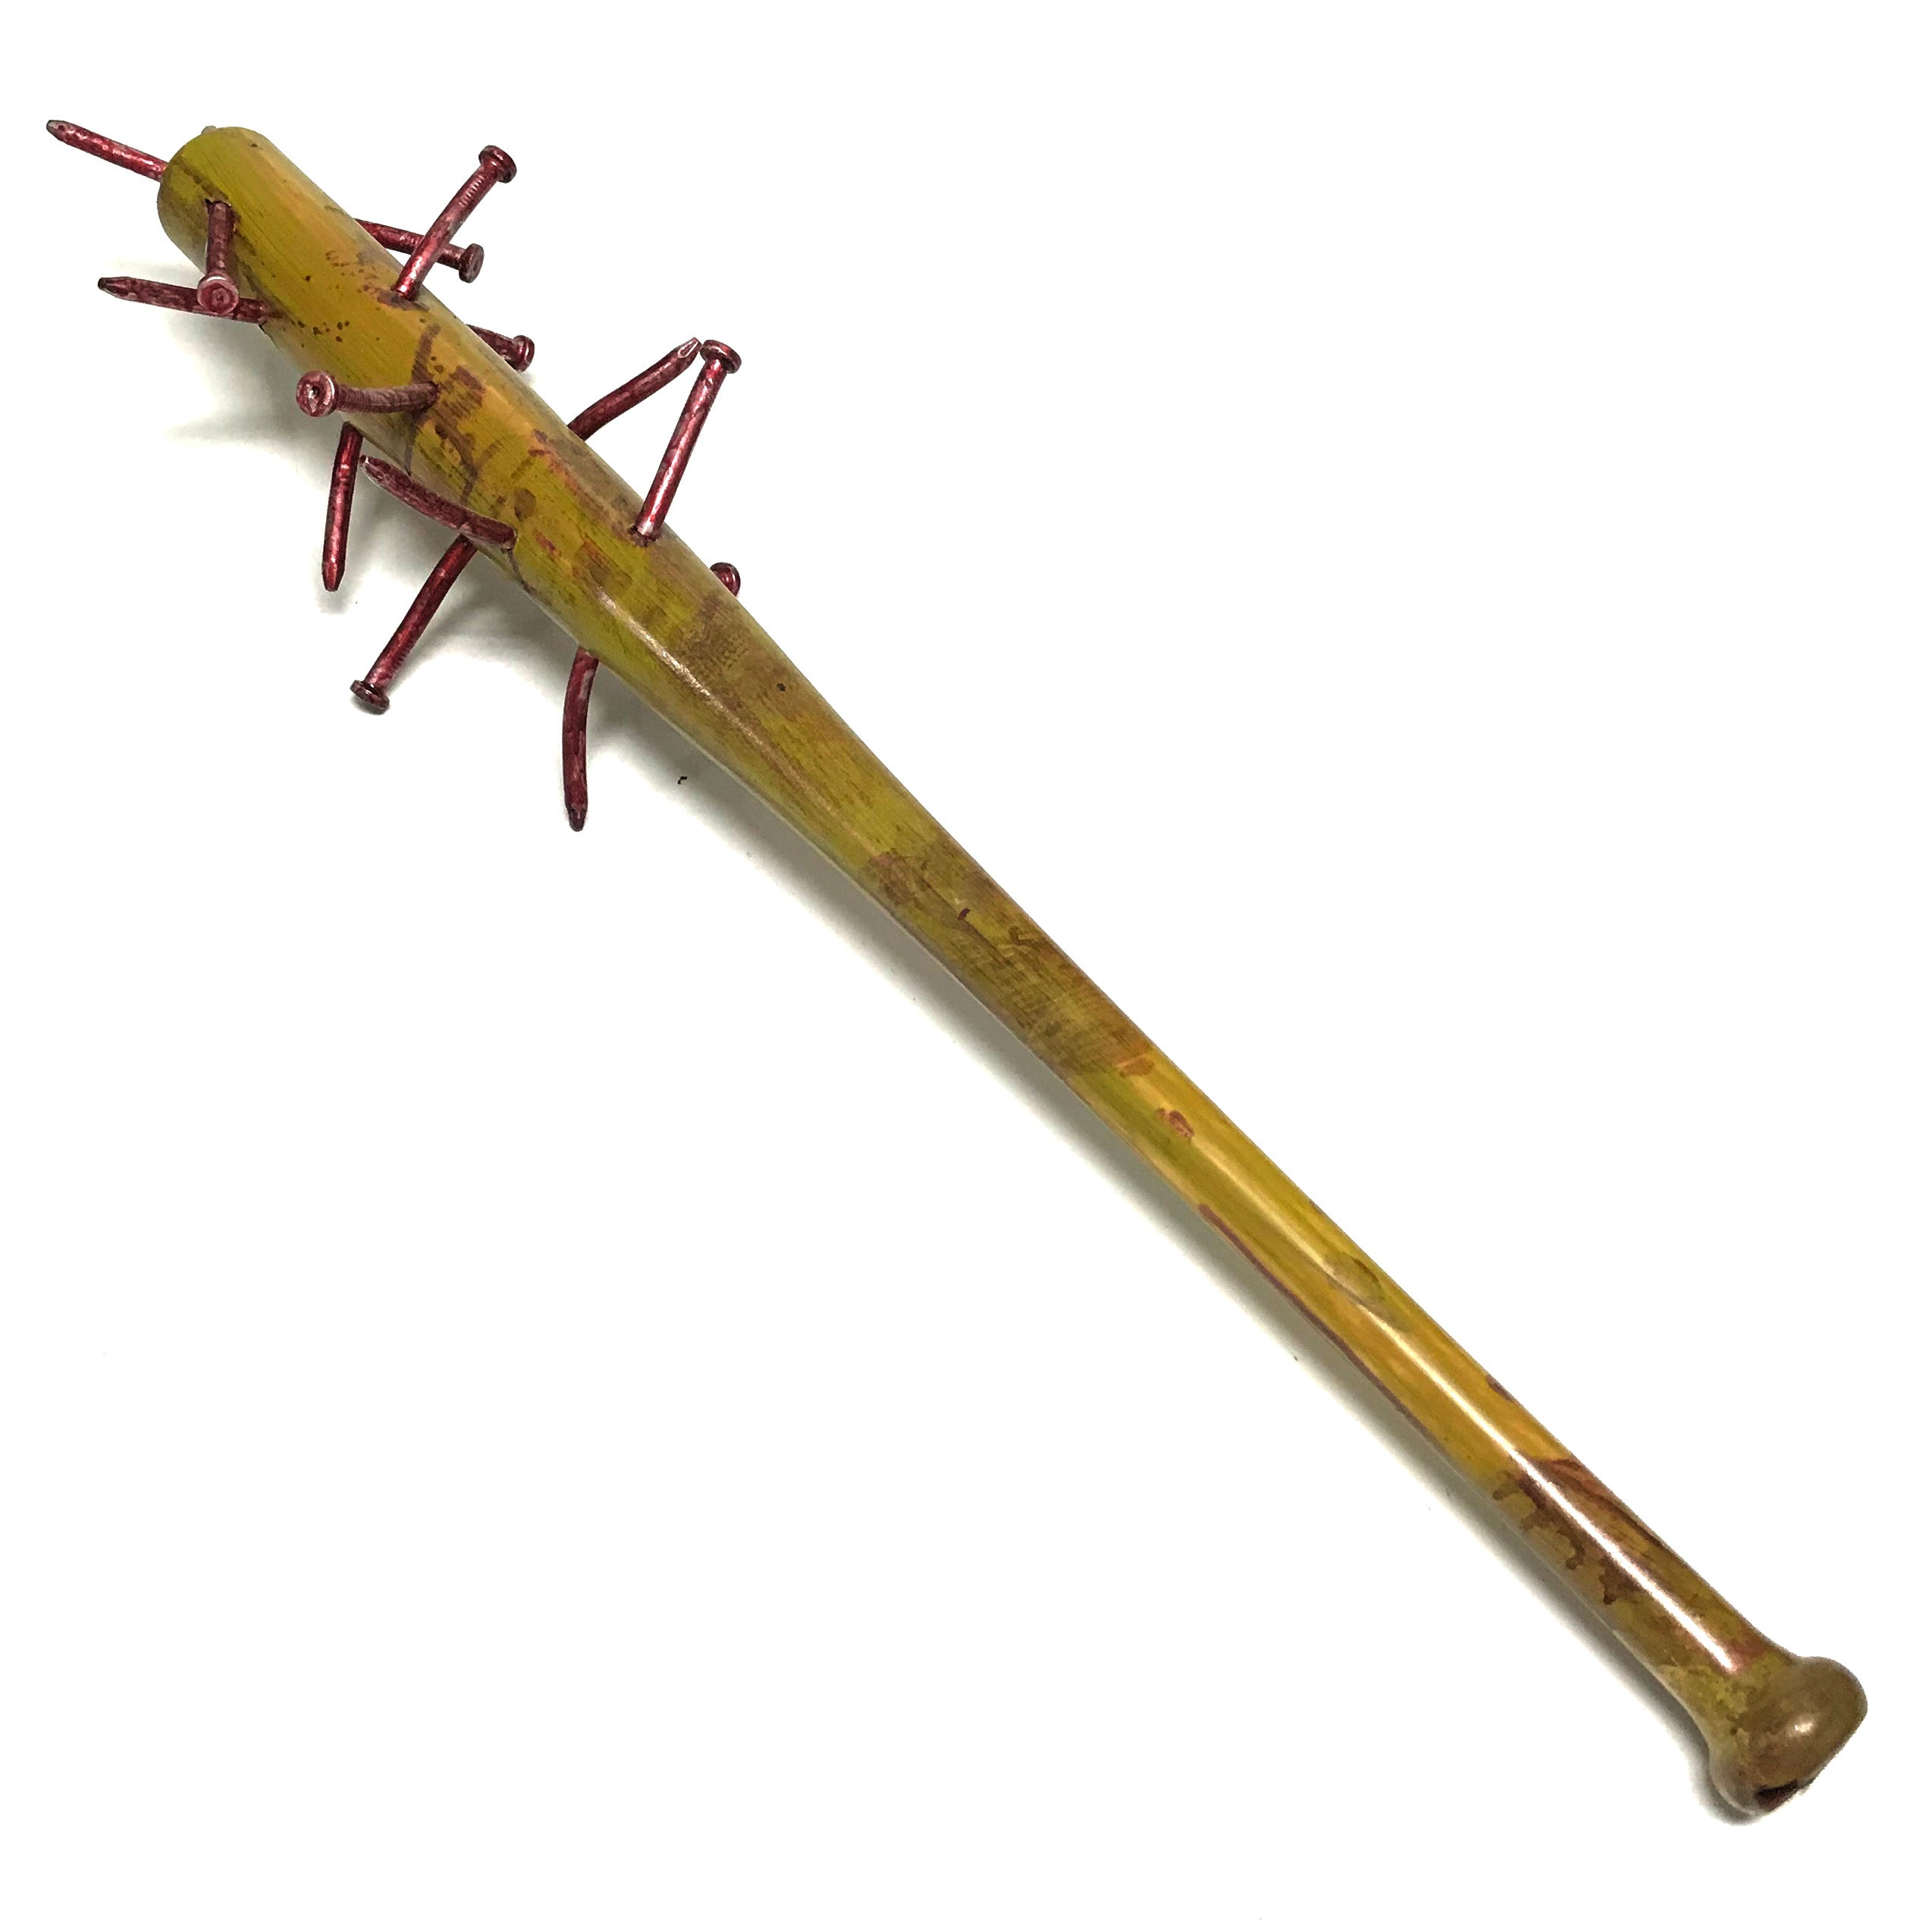 Nail Spike Baseball Bat Foam Rubber Action Prop - Bloody - Bloody - Inspired by NETFLIX Stranger Things